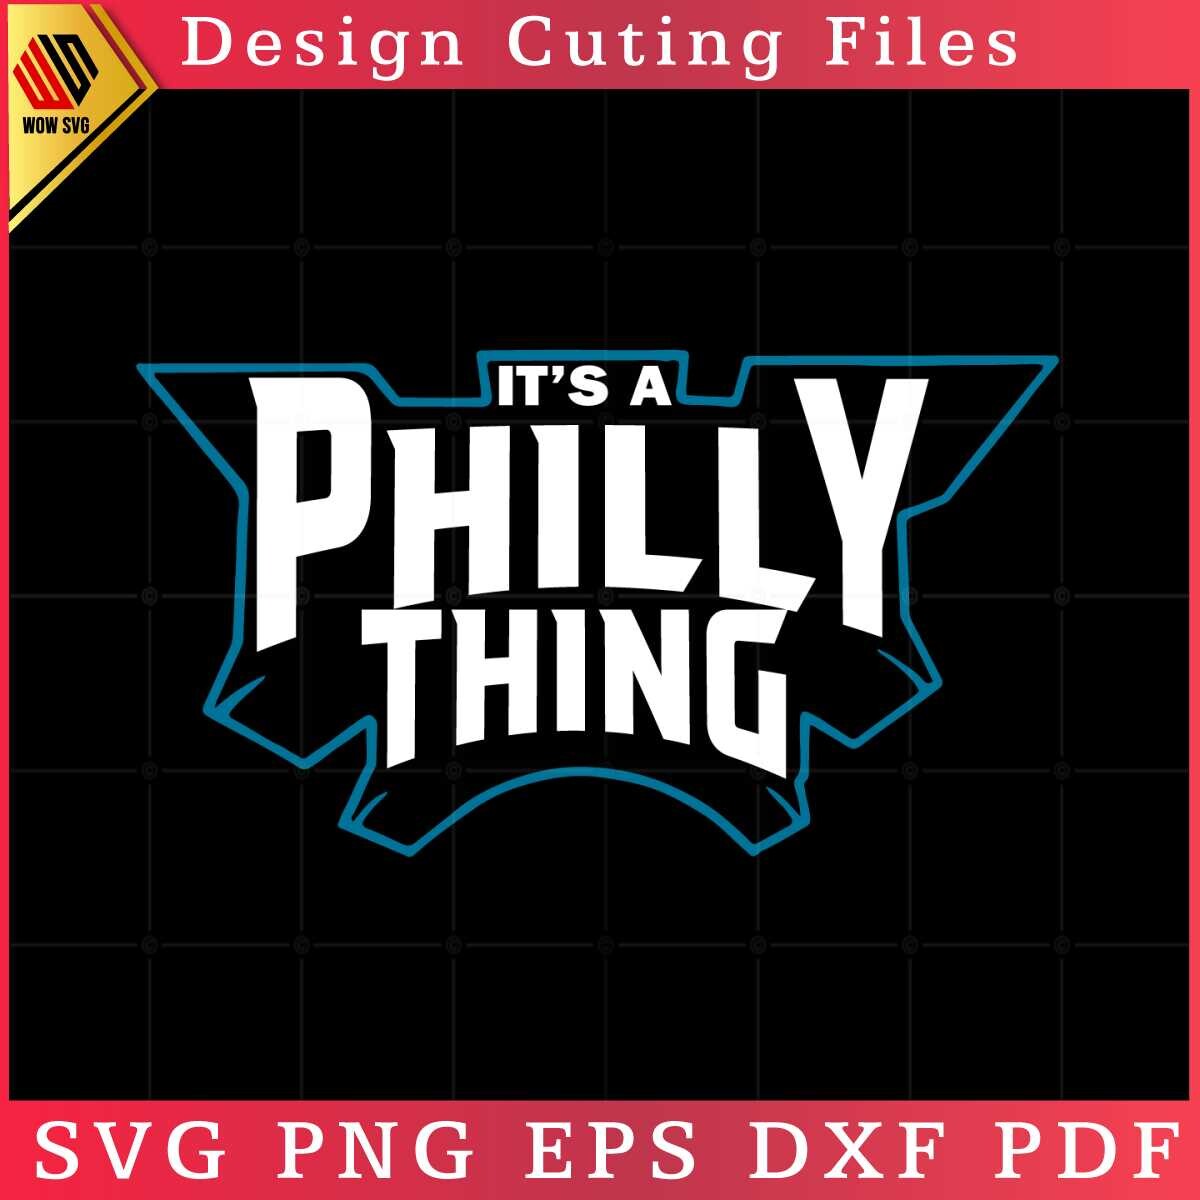 ArtStation - Philadelphia Eagles It's A Philly Thing City Svg Cutting Files